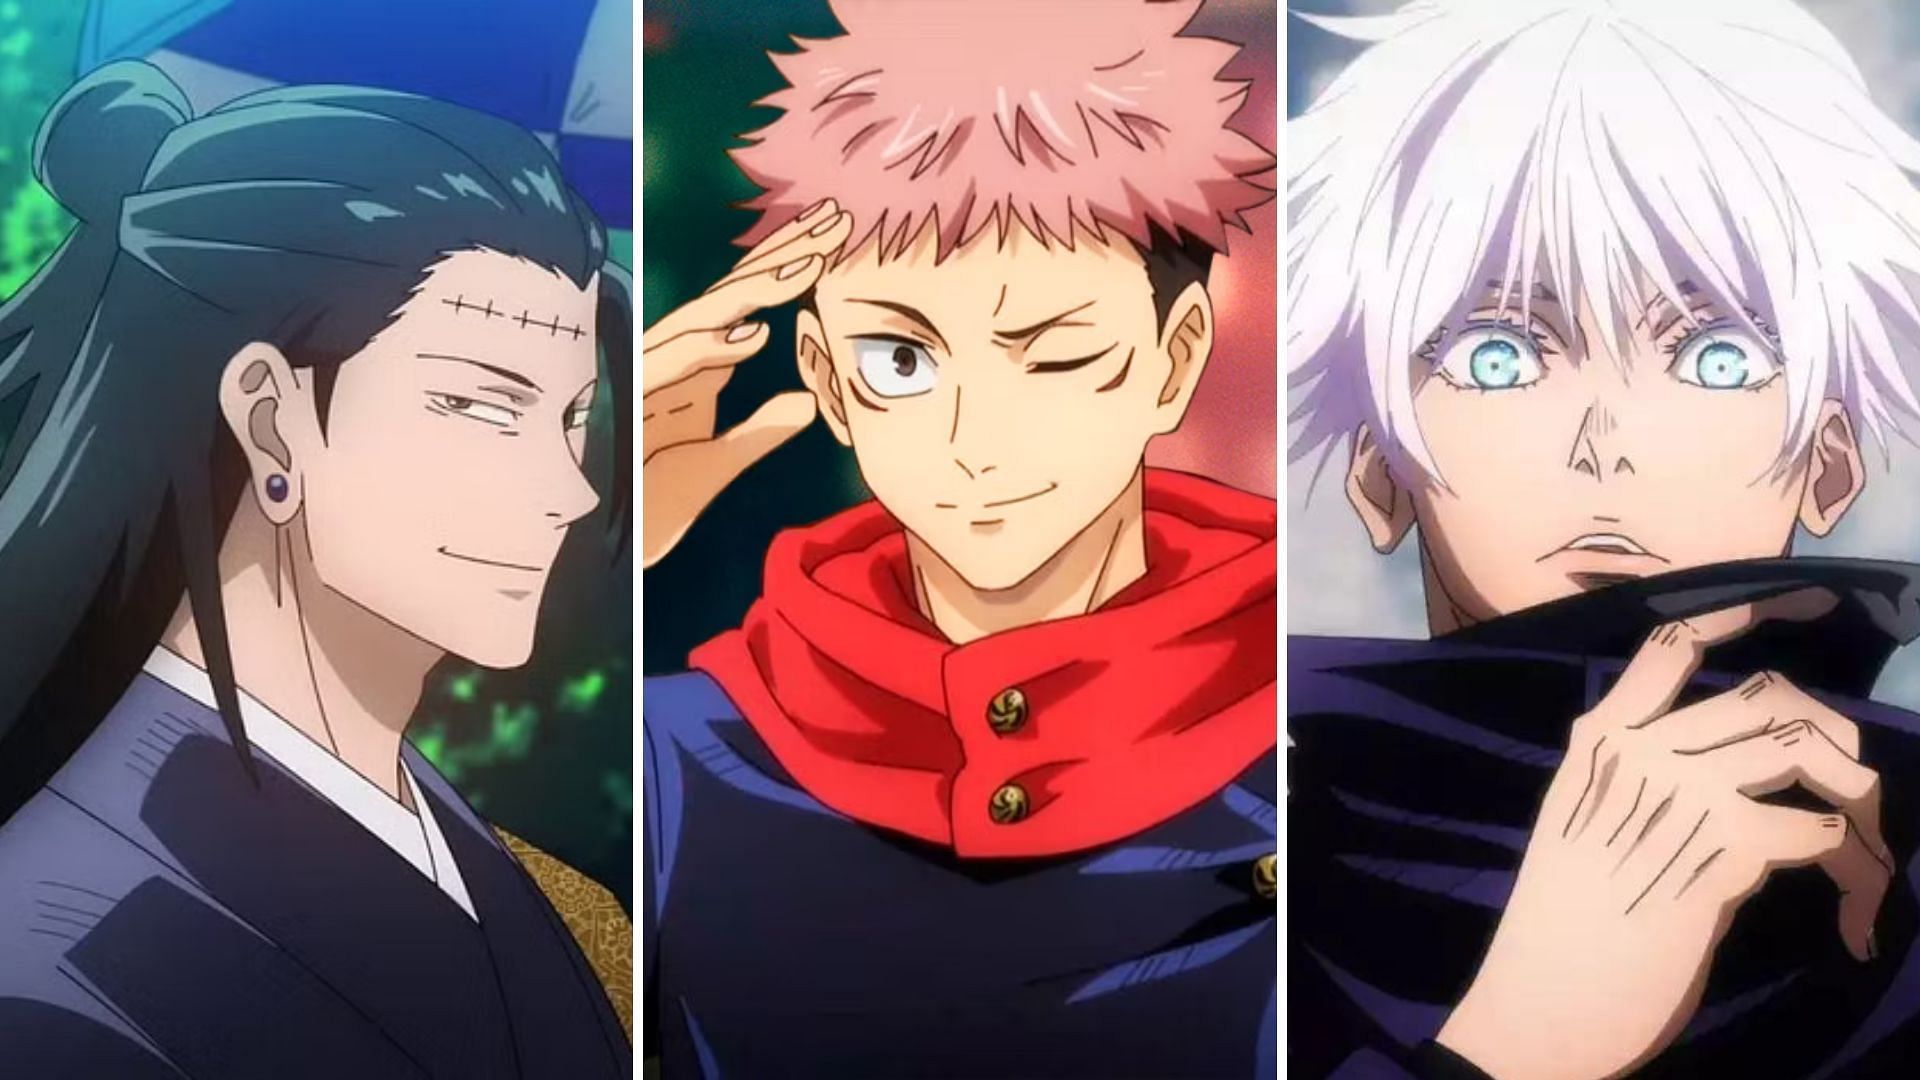  5 Jujutsu Kaisen characters that need power-ups and 5 others that need to be nerfed. (Image via Studio MAPPA)